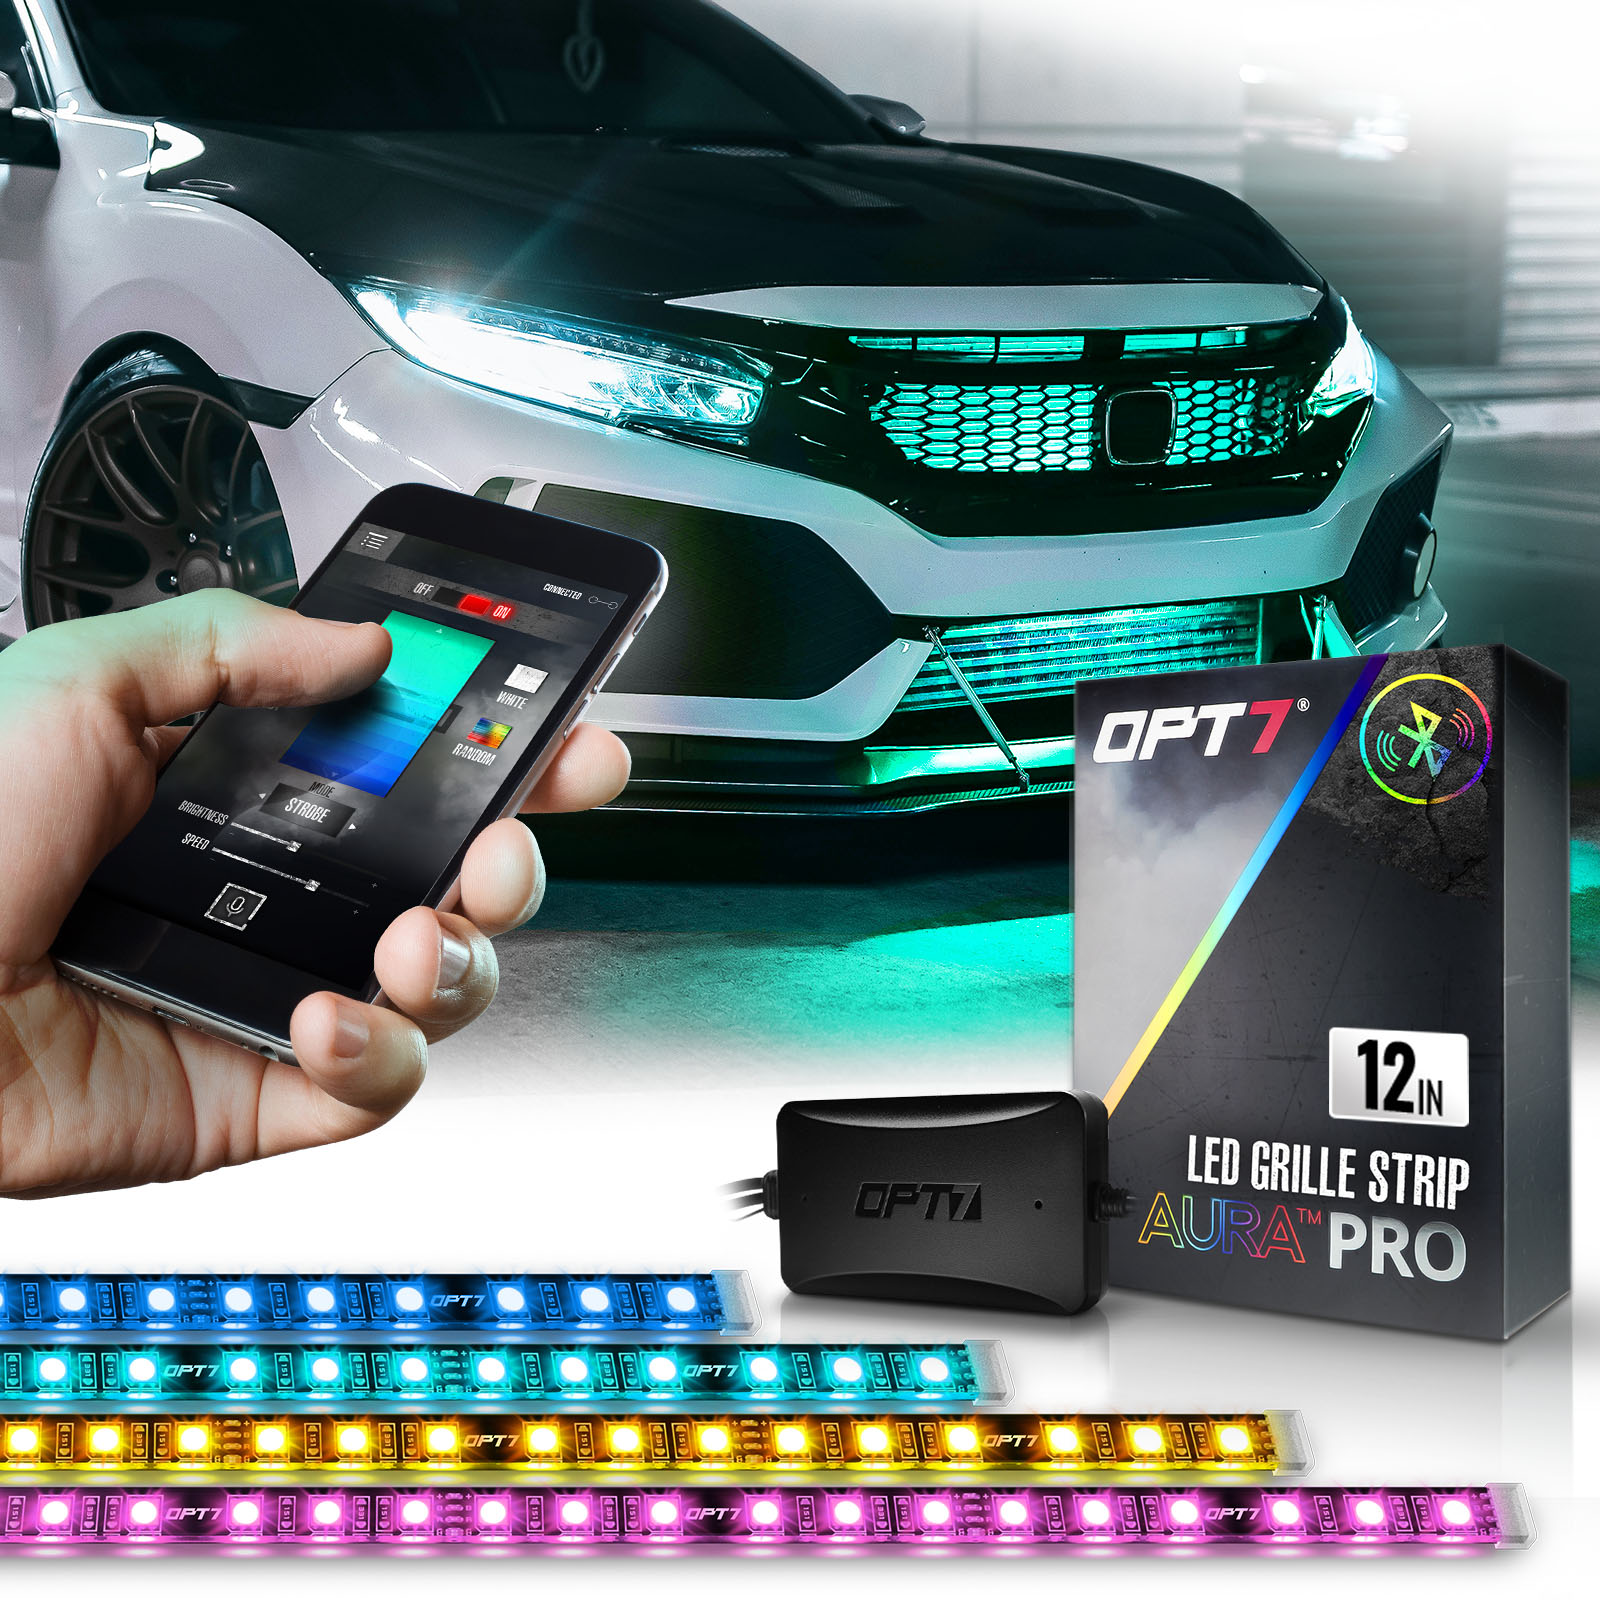 Opt7 Aura Pro Bluetooth 4pc LED Lighting Kit for Grille | 12 inch Multi-Color Strips W/Soundsync - Waterproof Peel'n'Stick Front Grill Valence - App